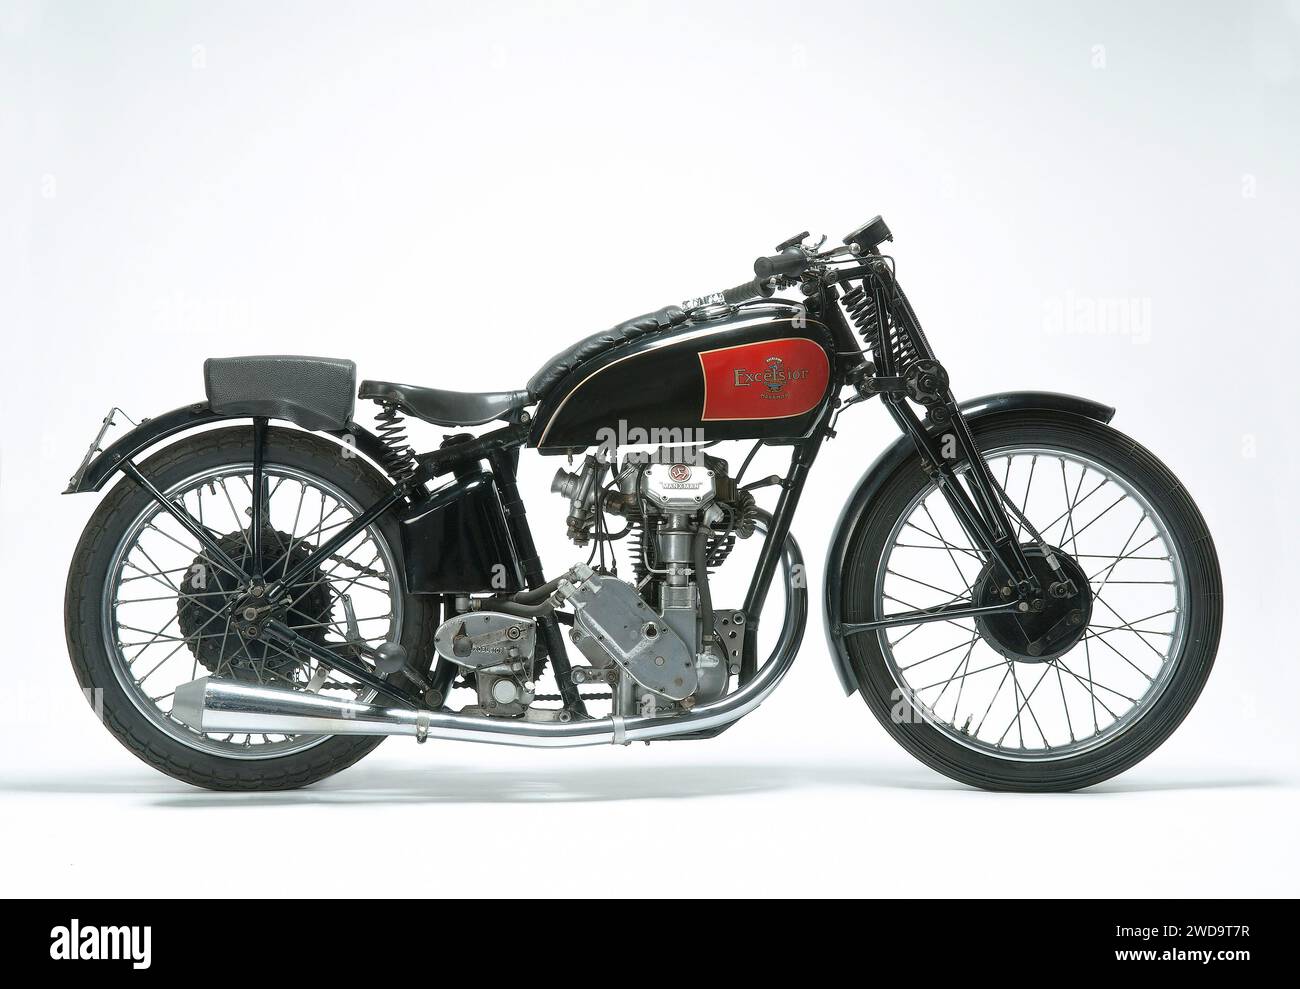 Excelsior Manxman classic motorcycle. Showing the right hand side, studio image on white background. Stock Photo